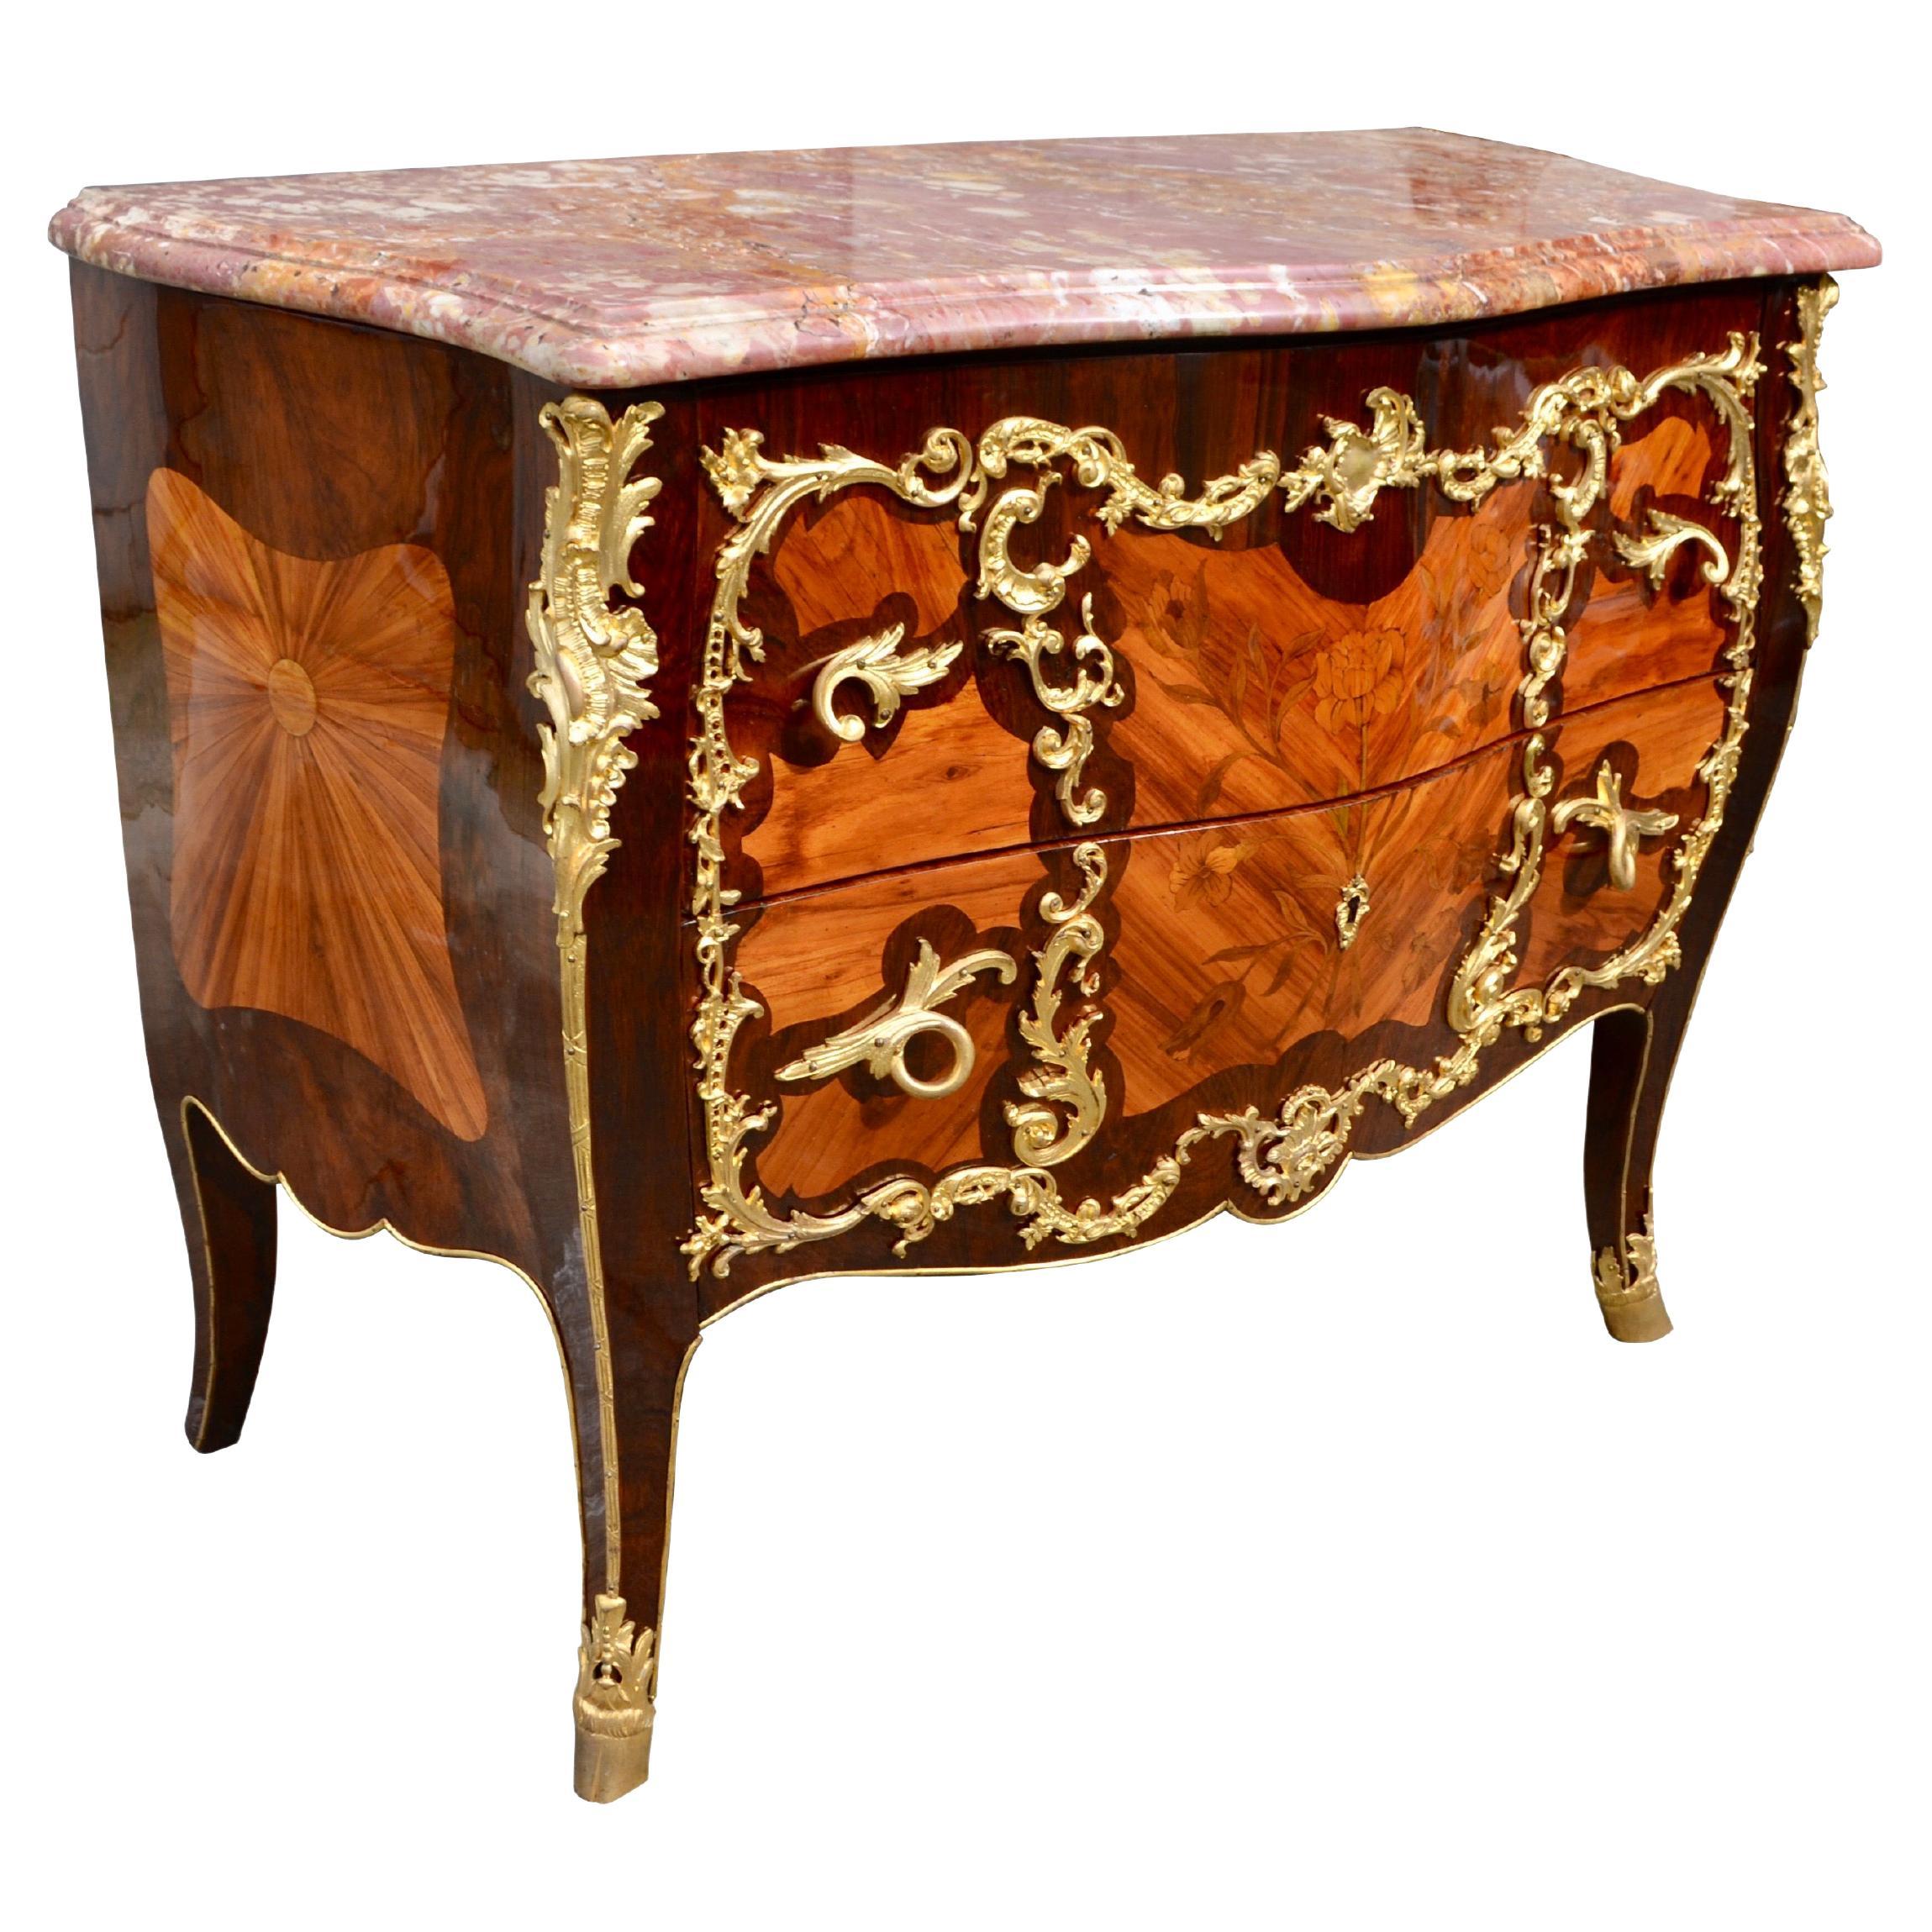 19th Century French Louis XV Style Marquetry and Ormolu Bombe Chest of Drawers